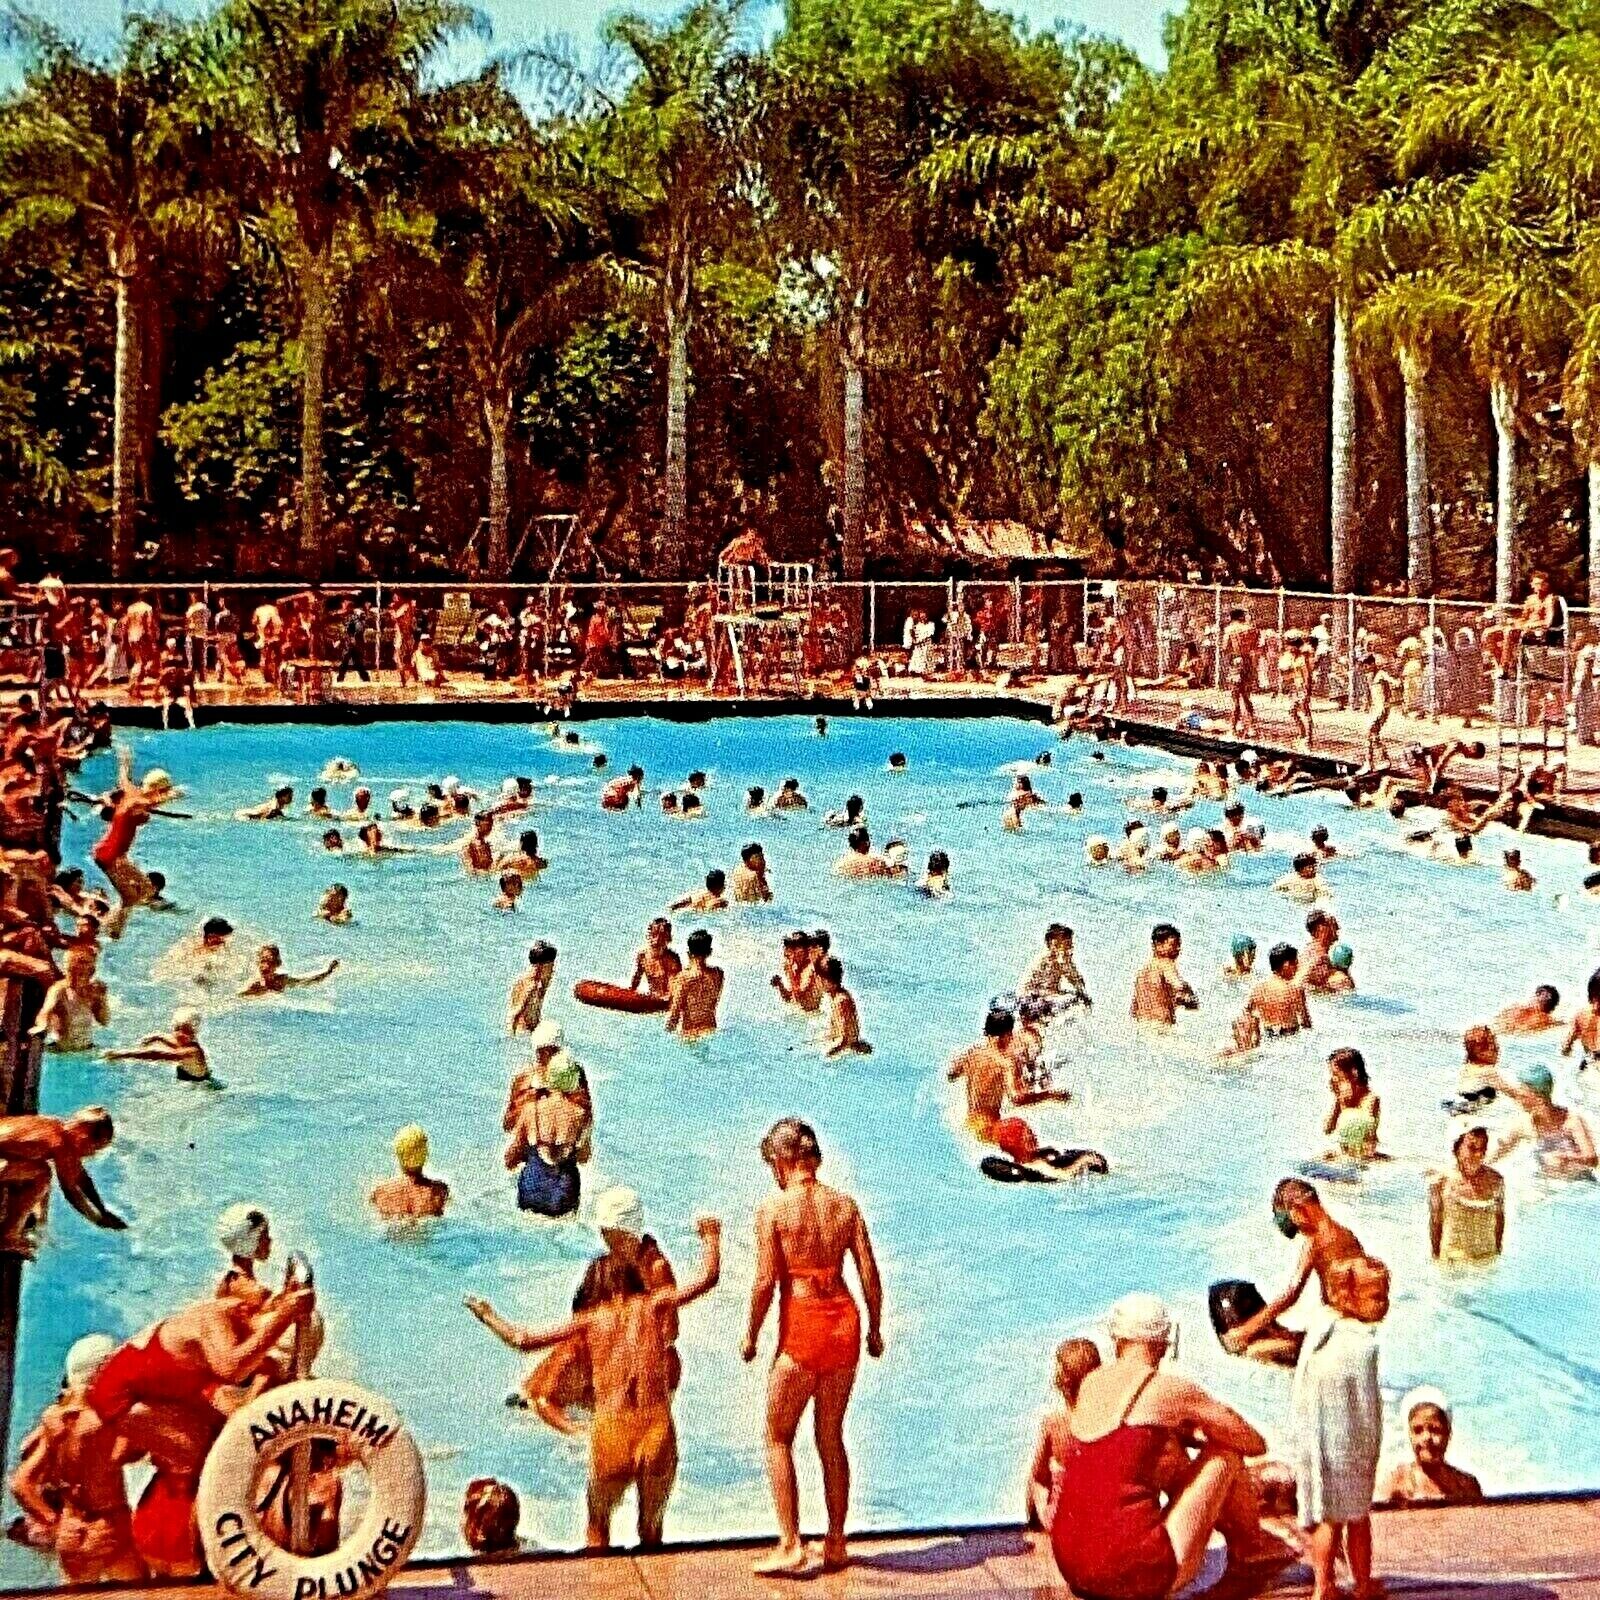 Postcard City Park Plunge, Anaheim California 1957 Swimming Pool, Bathing Suits